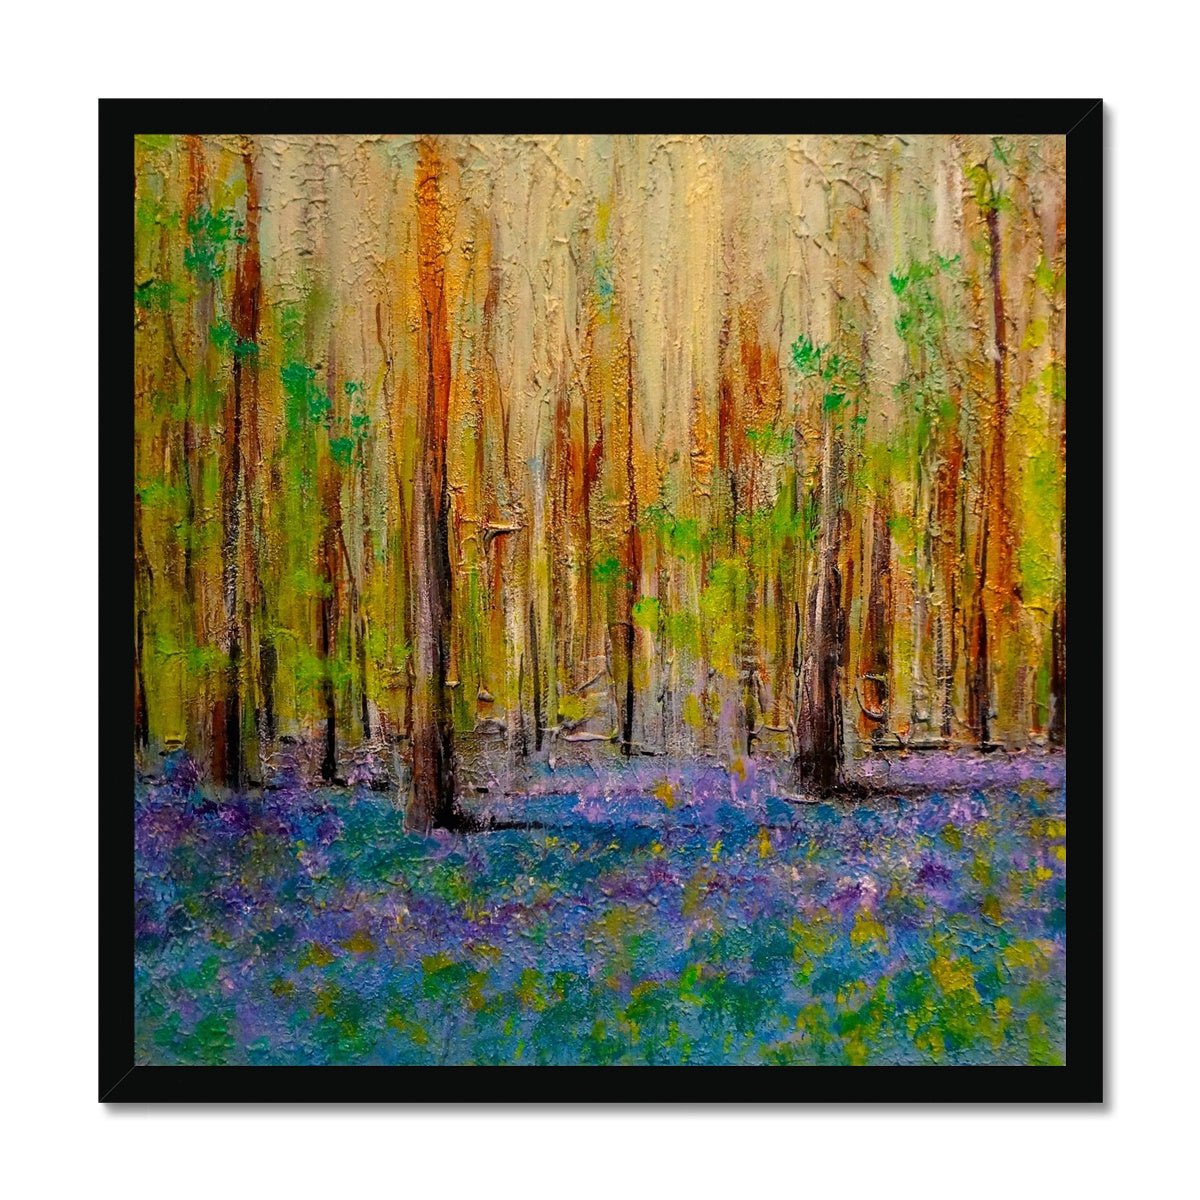 Highland Bluebells Painting | Framed Prints From Scotland-Framed Prints-Scottish Highlands & Lowlands Art Gallery-20"x20"-Black Frame-Paintings, Prints, Homeware, Art Gifts From Scotland By Scottish Artist Kevin Hunter